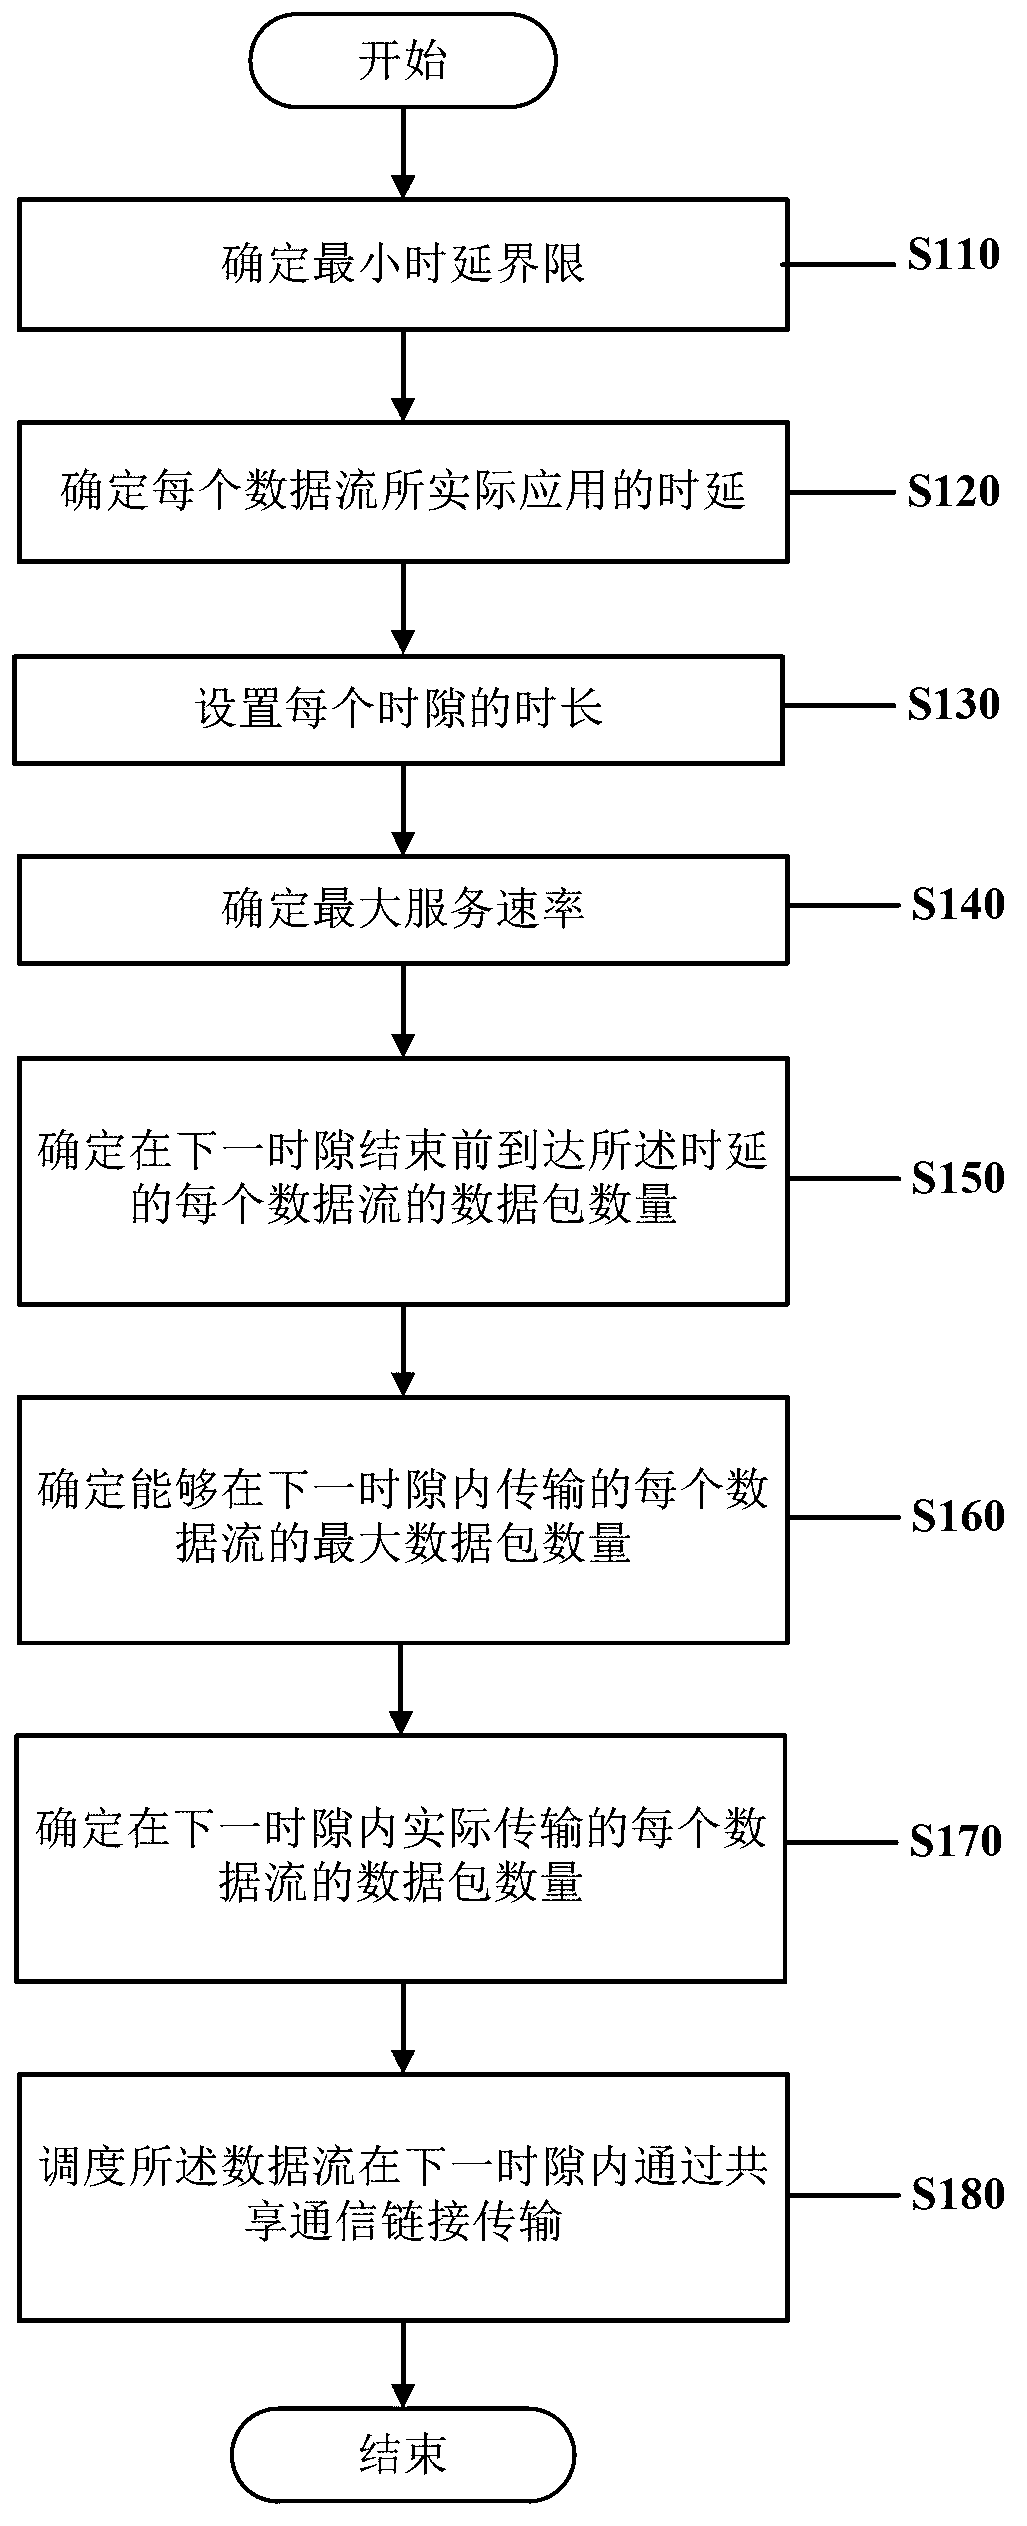 Method and apparatus for scheduling transmission of data streams over a common communication link